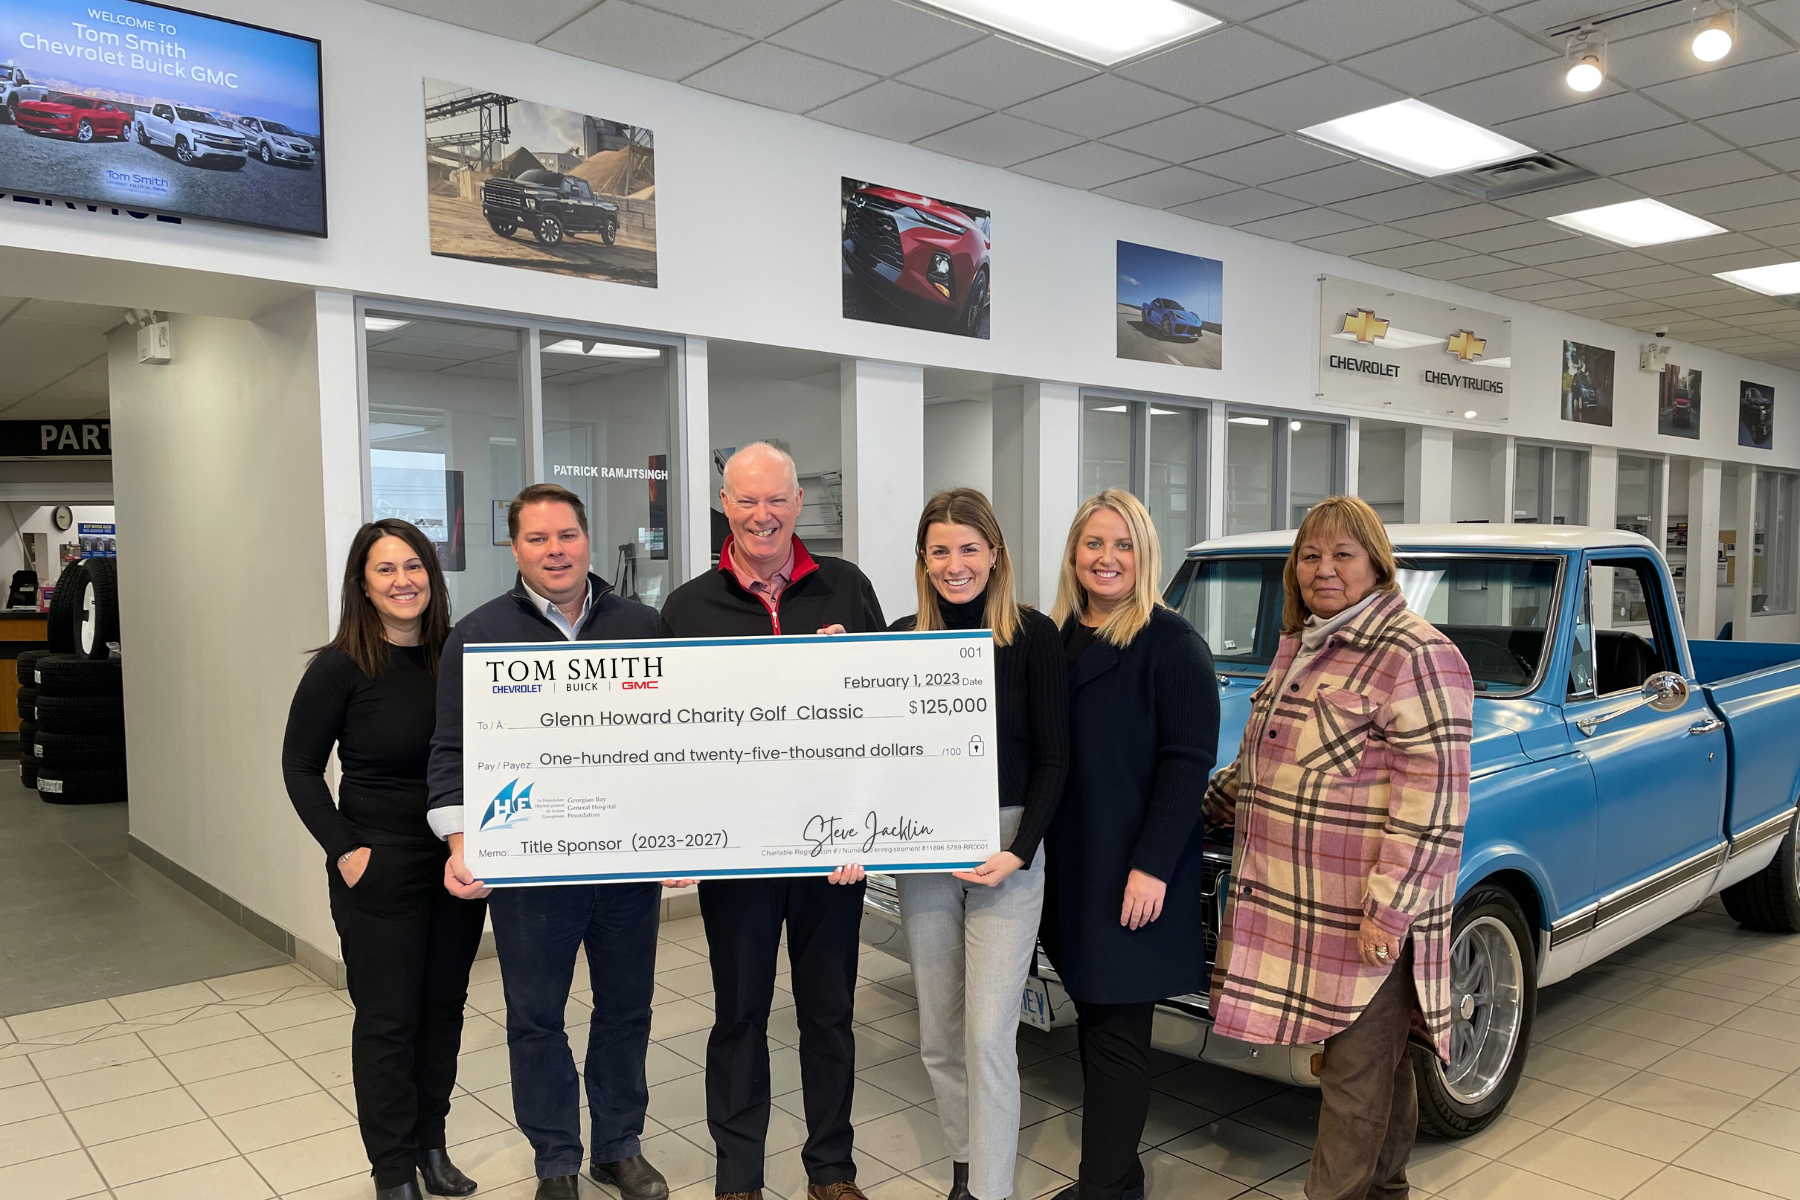 Two women and four men hold a giant cheque made out to the Glenn Howard Charity Classic for $125,000 from Tom Smith Motors